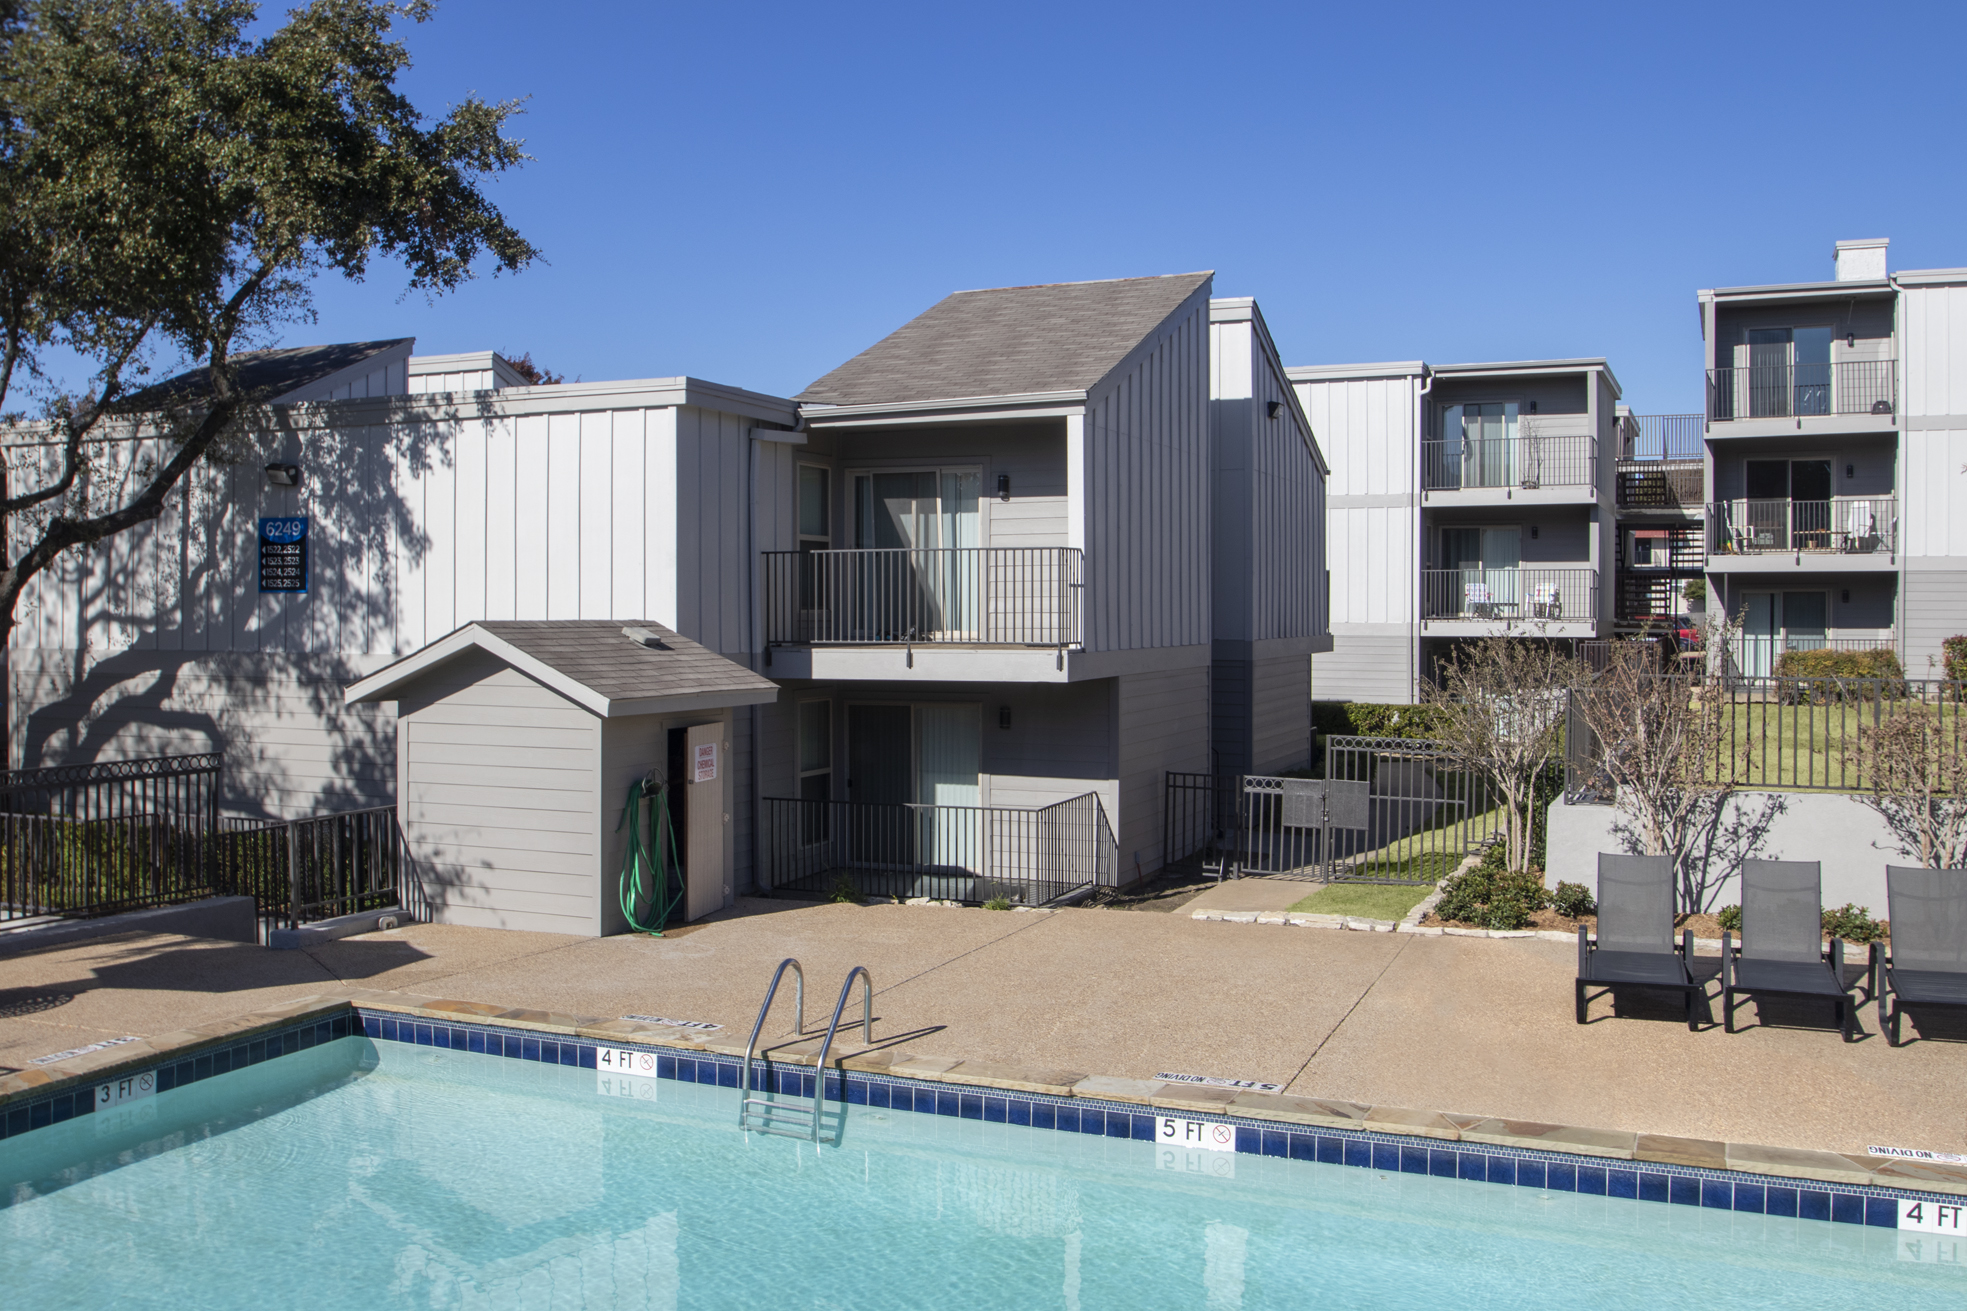 This is a photo of the pool area and apartment exteriors at The Biltmore Apartments in Dallas, TX.